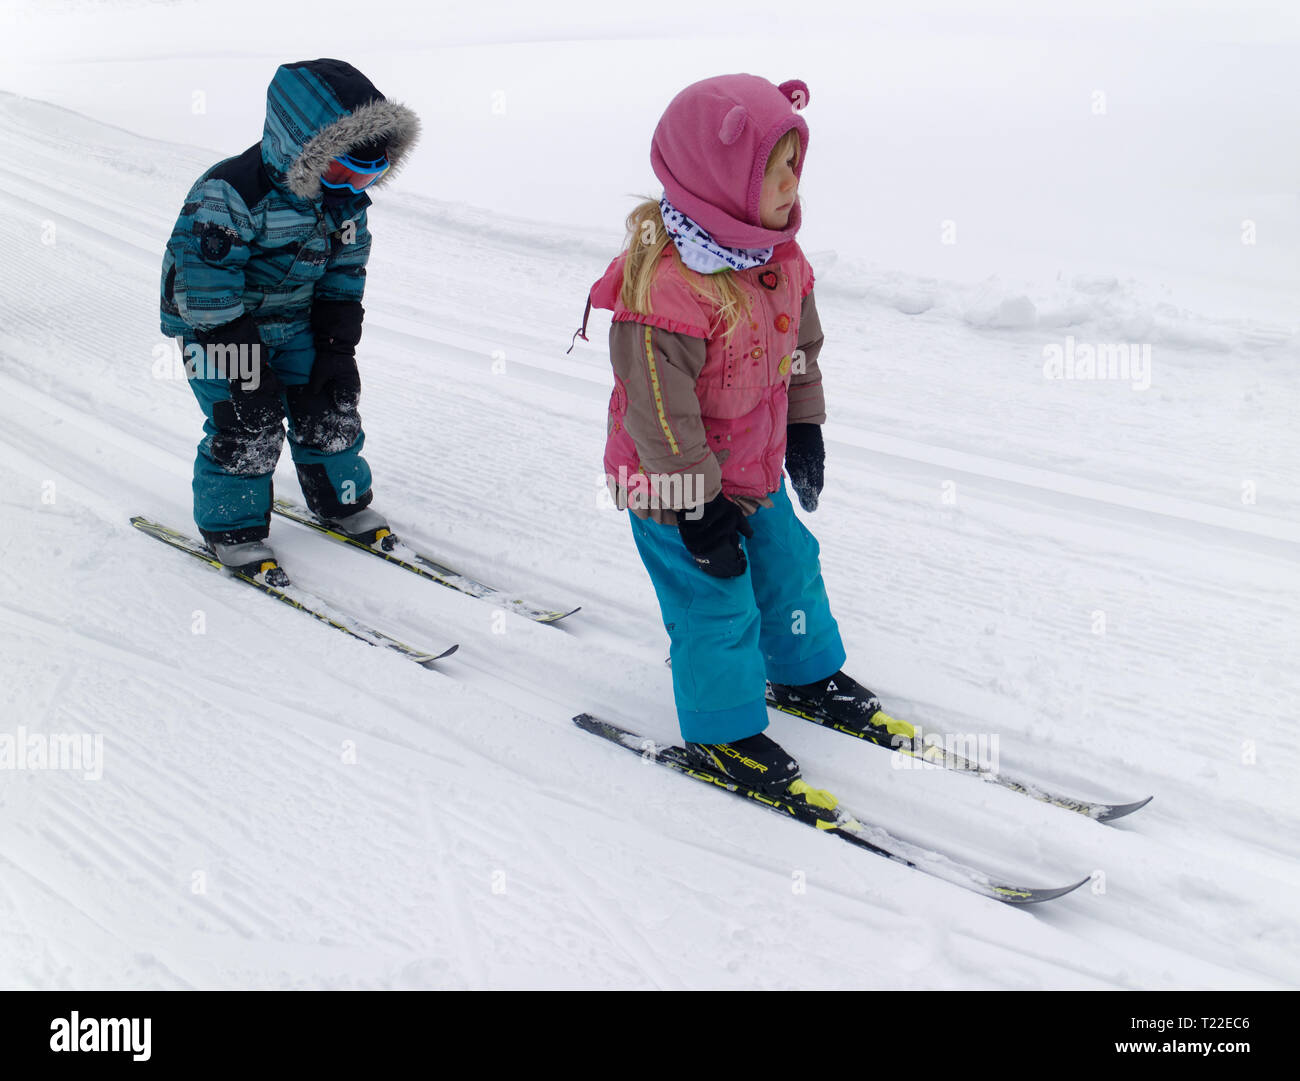 Two little girls (4 yr olds) cross country ski-ing Stock Photo